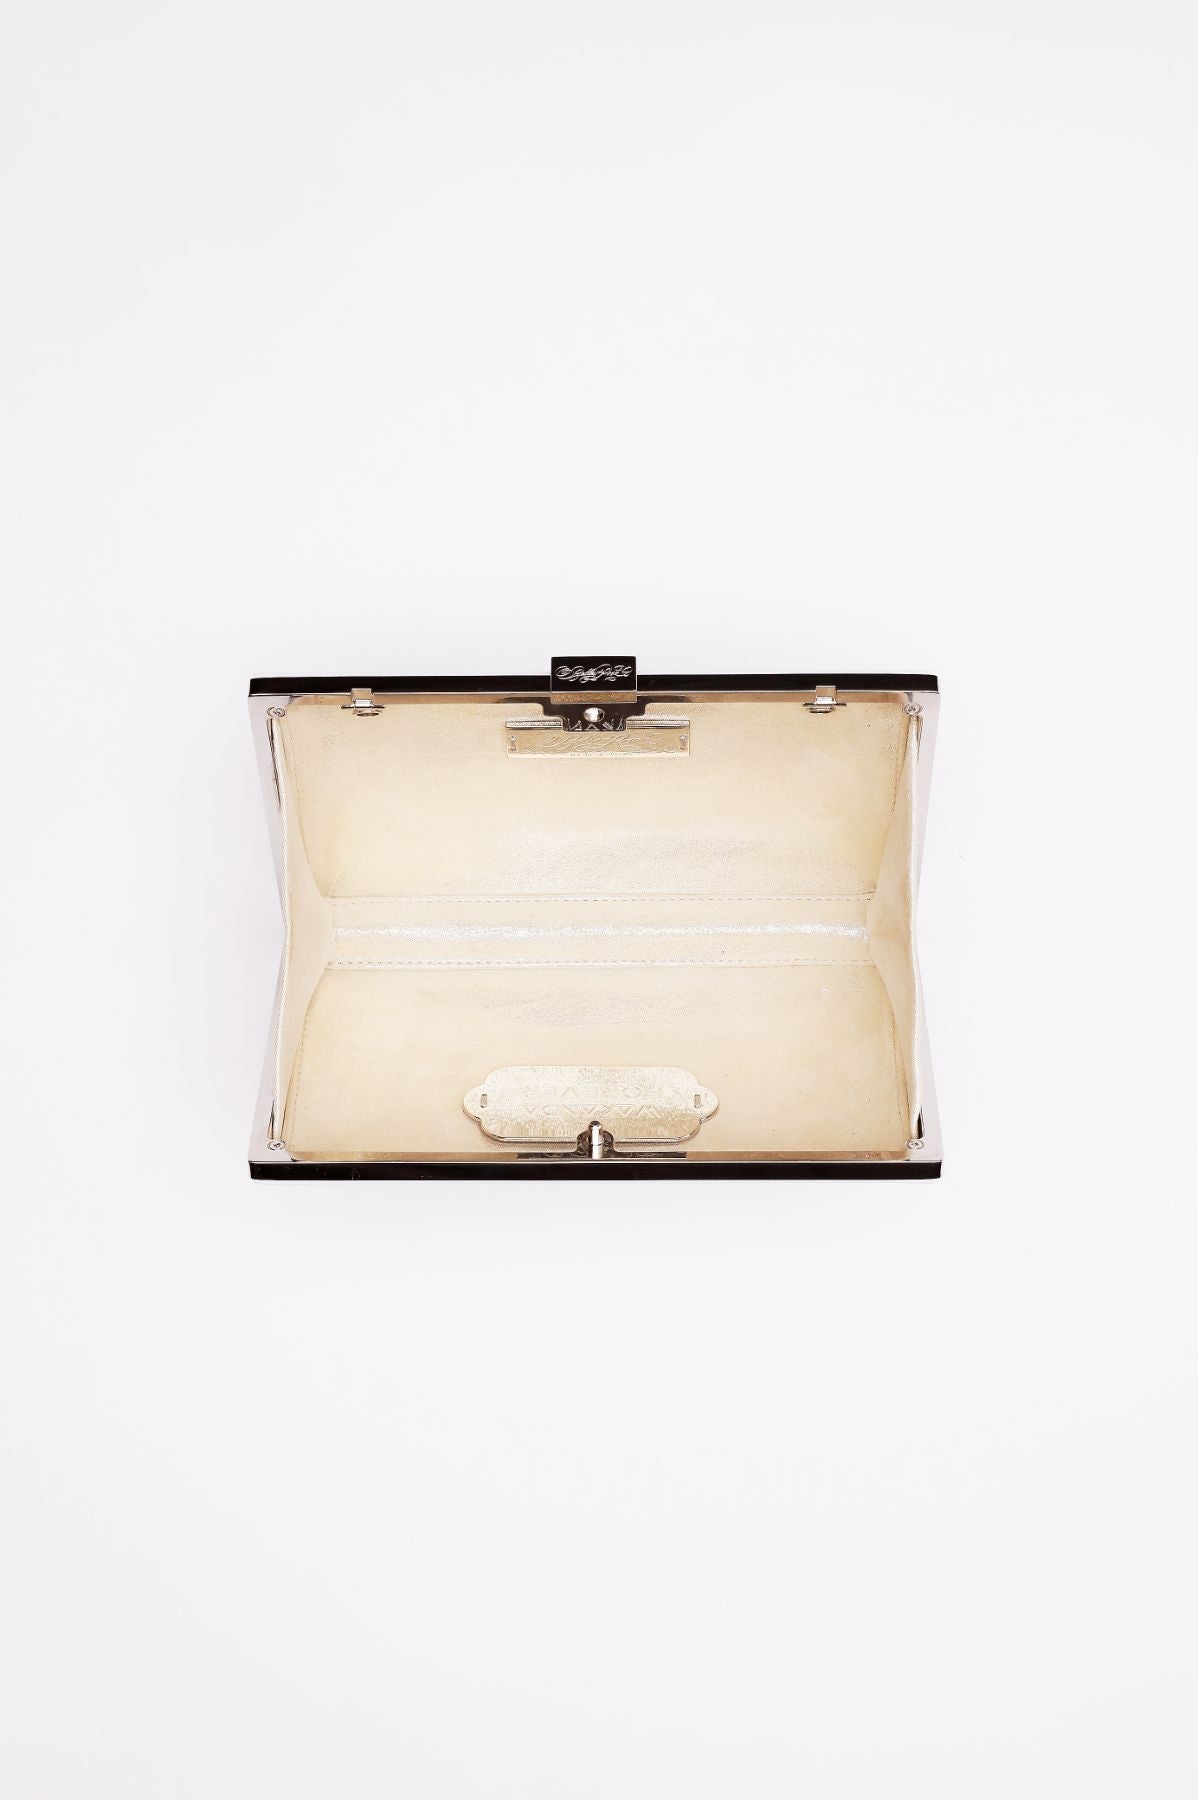 Top open view of Milan Clutch in pearl white with silver hardware frame.